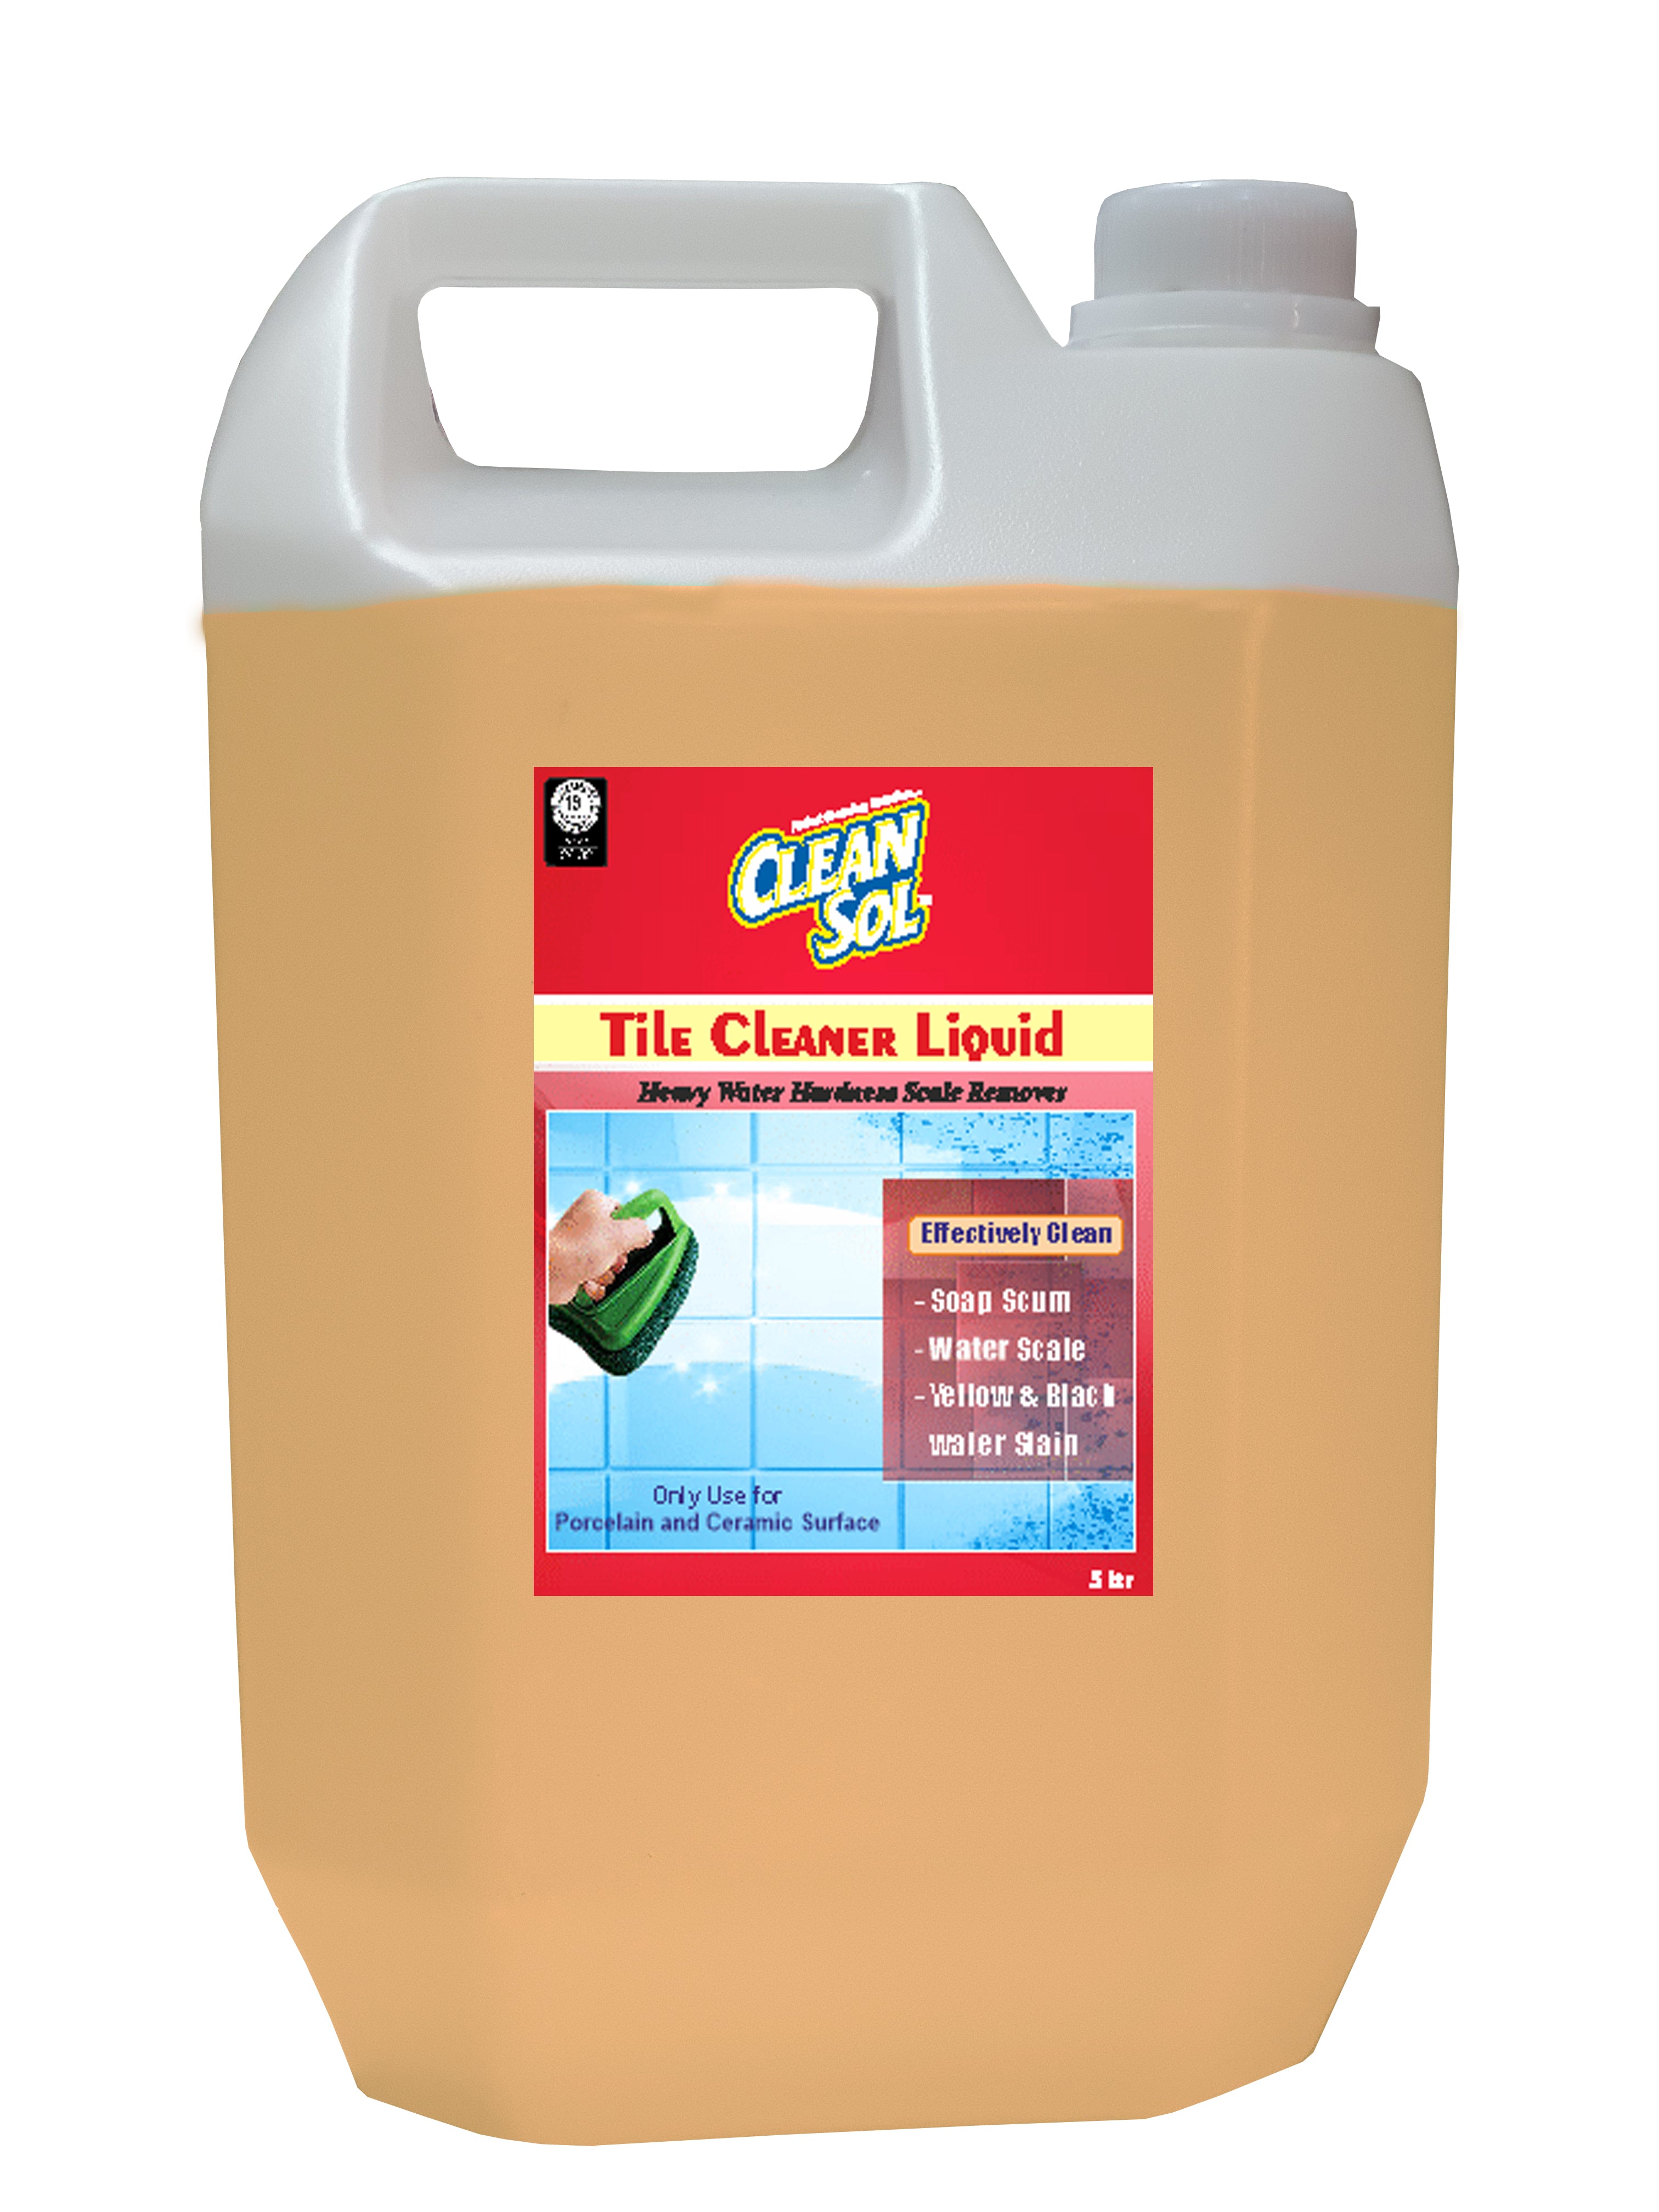 Cleansol Tile Cleaner Liquid Strong Heavy Stain Remover